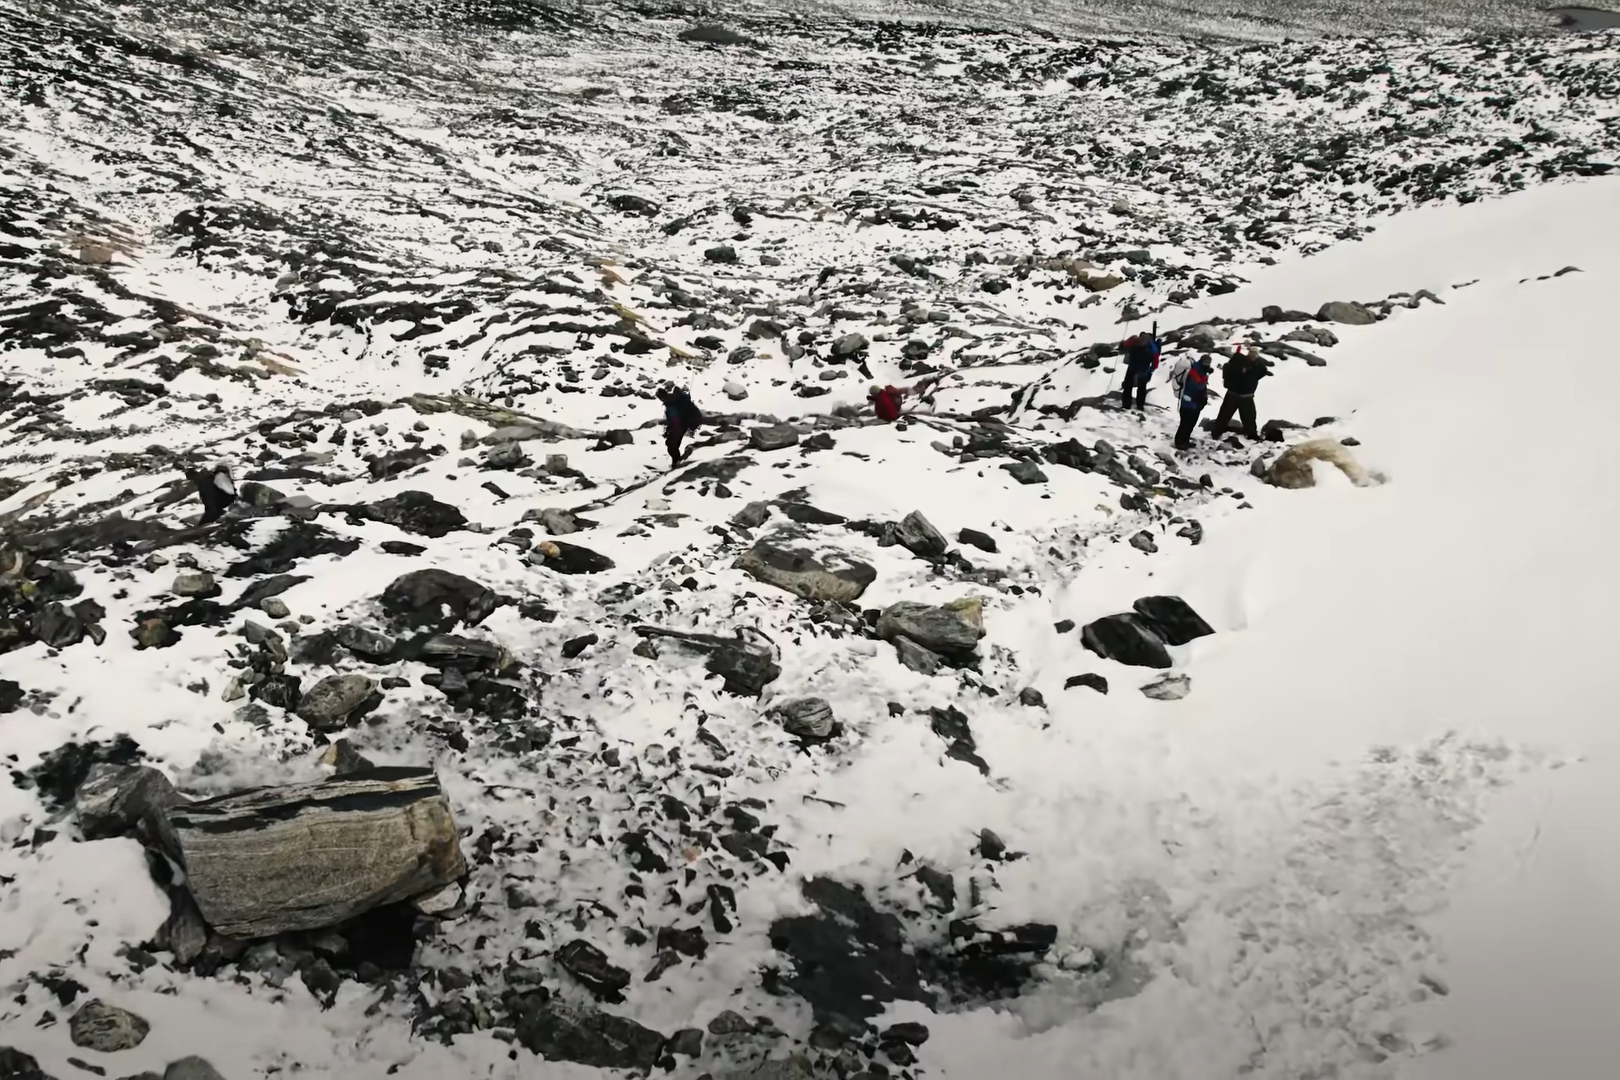 The team traverses the Digervarden ice patch on Sept. 26, 2021. Image: Glacier Archaeology Program / Secrets of the Ice